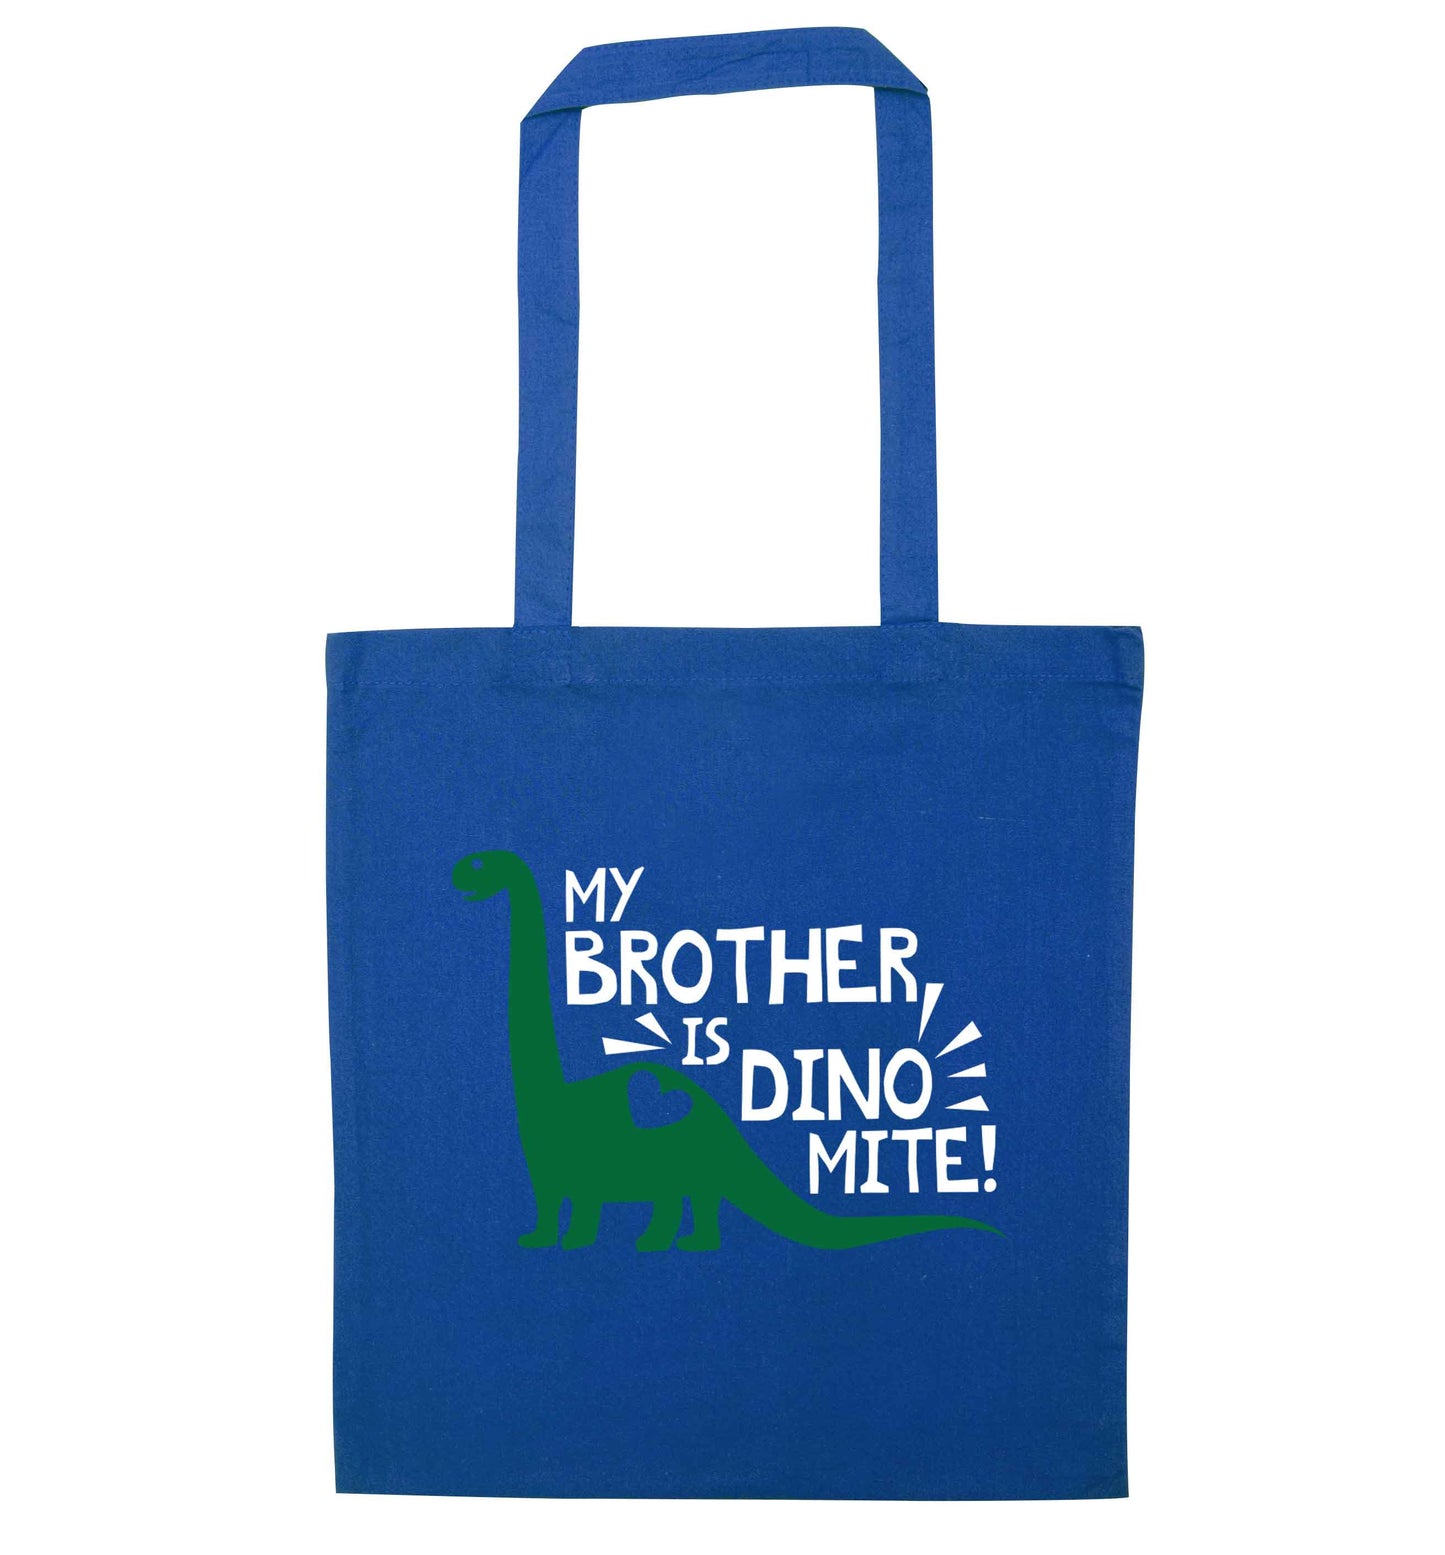 My brother is dinomite! blue tote bag